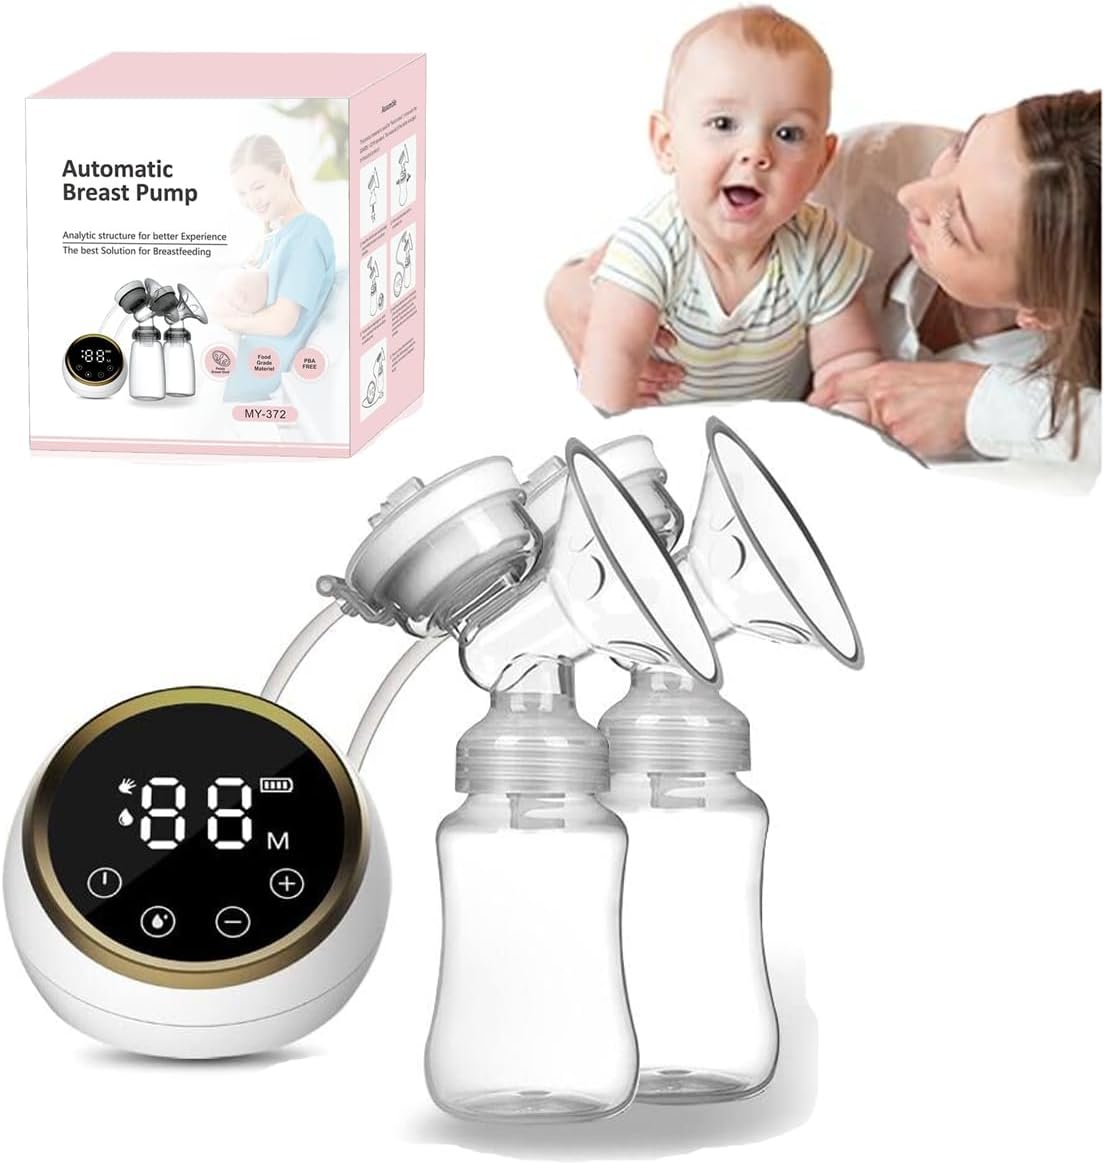 Double Electric Breast Pump, ALMEKAQUZ Safe Baby Breastfeeding Pacifier Bottle Suction Massage Pump Kit with 3 Modes 9 Levels, Quiet and Rechargeable Breast Pump for Home Travel Working